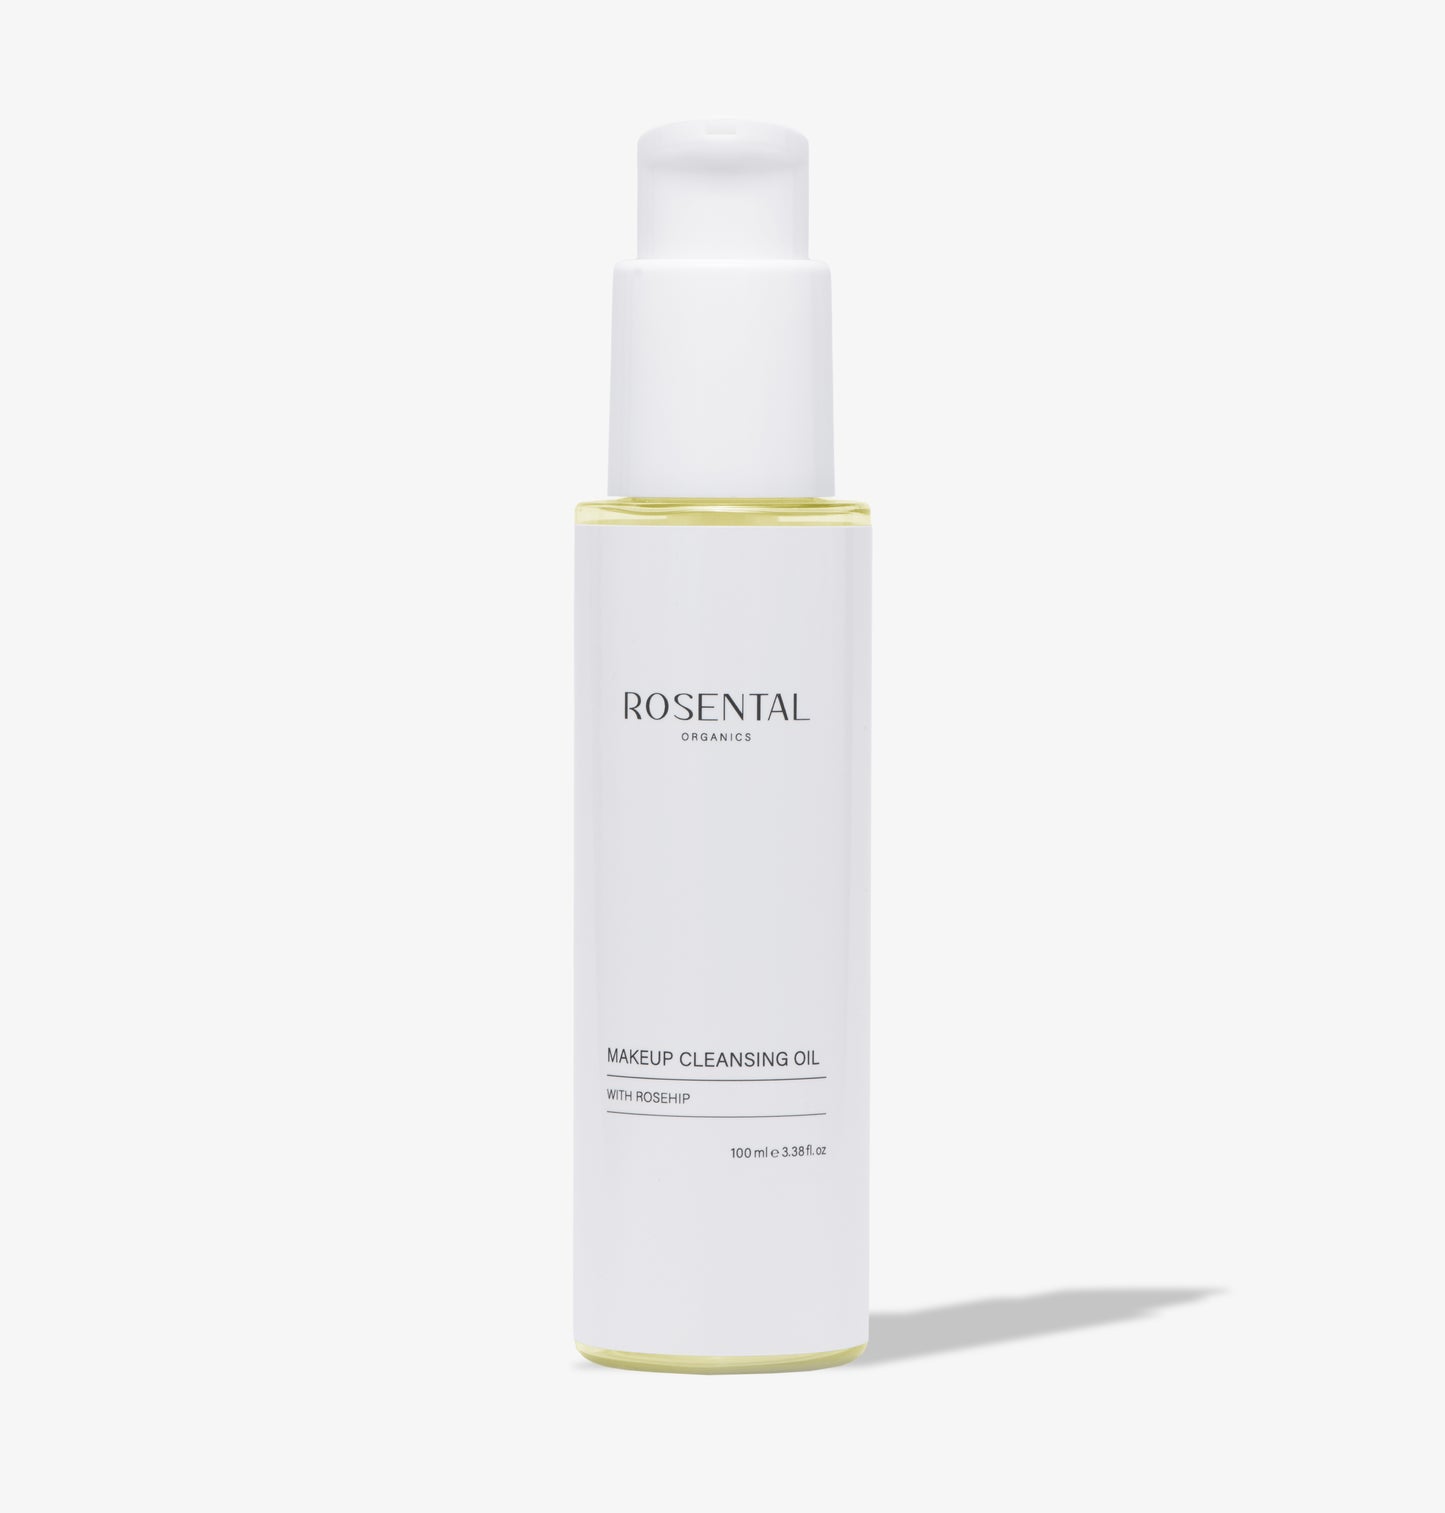 Free Makeup Cleansing Oil